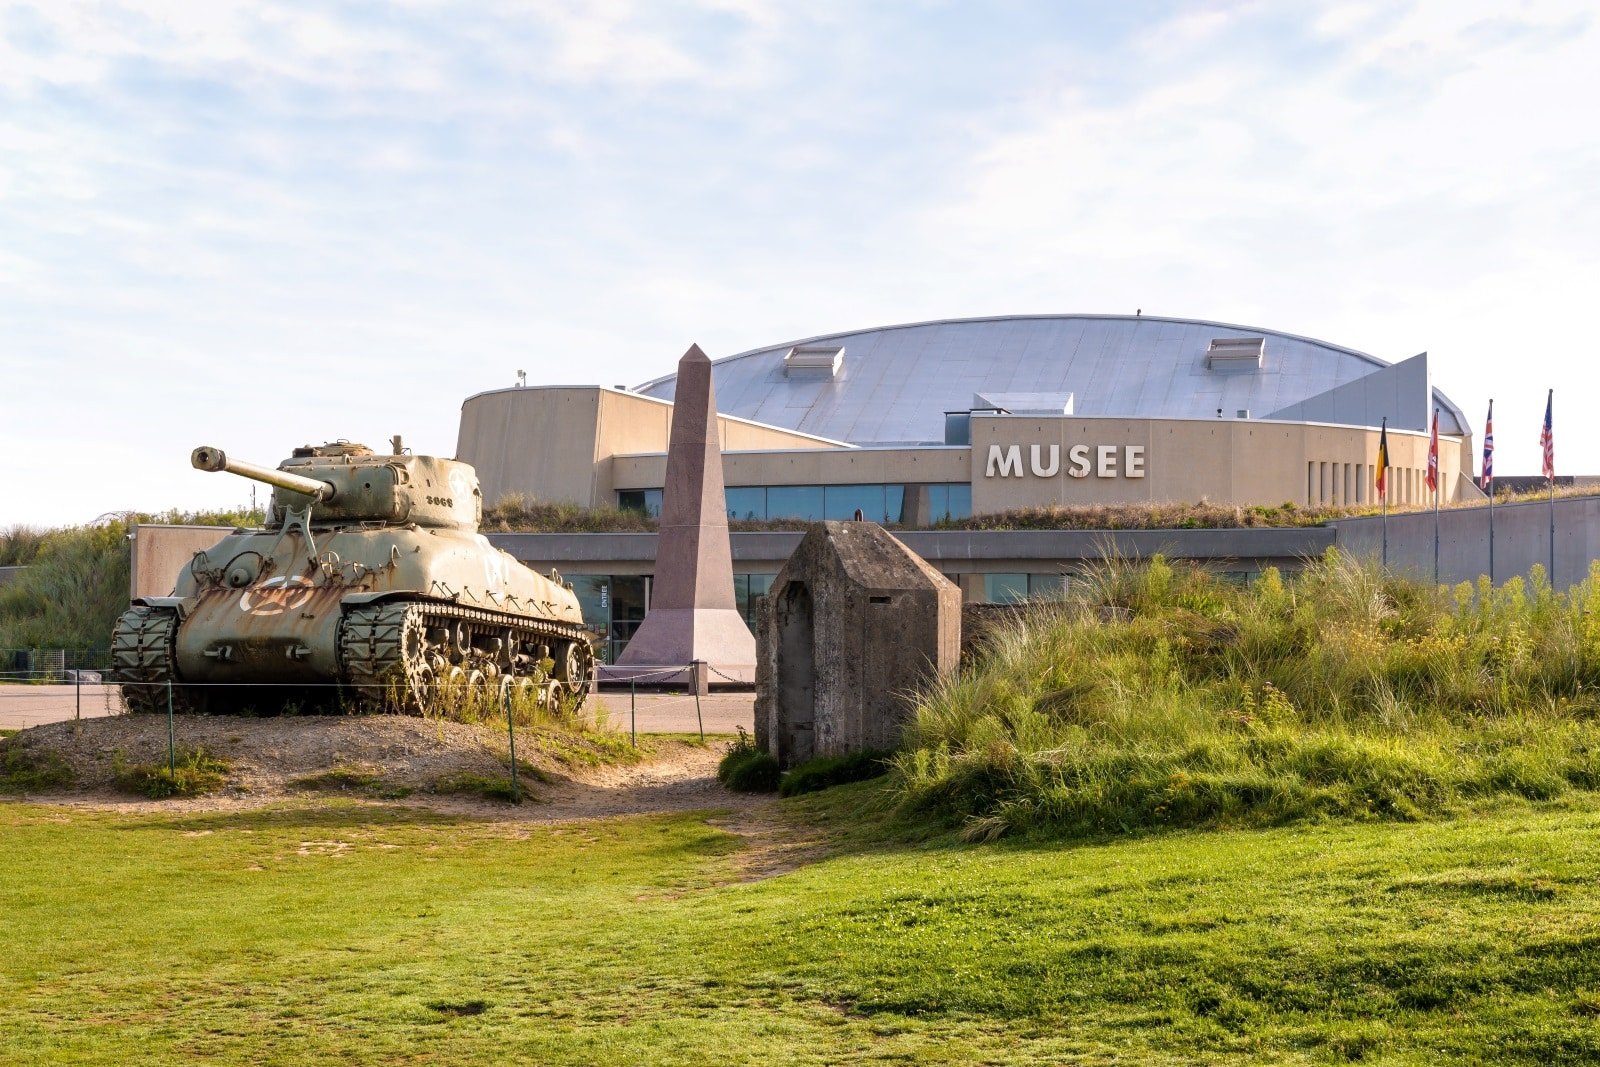 <p><span>Utah Beach, with its expansive sands and gentle dunes, belies the intense historical significance of this location. The Utah Beach Museum, situated at the very site of the D-Day landings, offers a poignant reminder of this beach’s pivotal role in World War II.</span></p> <p><span>The museum’s collection is comprehensive, featuring an array of military vehicles, personal artifacts, and immersive dioramas that vividly recount the events of June 6, 1944. As you explore the exhibits, you’ll gain a deeper understanding of the planning and execution of the landings and the immense challenges faced by the Allied forces.</span></p> <p><span>The museum also pays tribute to the airborne operations crucial to the success of the landings with detailed accounts and displays. Stepping outside onto Utah Beach, the contrast between the peaceful present and its turbulent past becomes strikingly evident, offering a moment for reflection on the sacrifices made on these shores.</span></p> <p><b>Insider’s Tip: </b><span>Look out for the original B-26 Marauder aircraft displayed at the museum, a rare piece of history.</span></p>